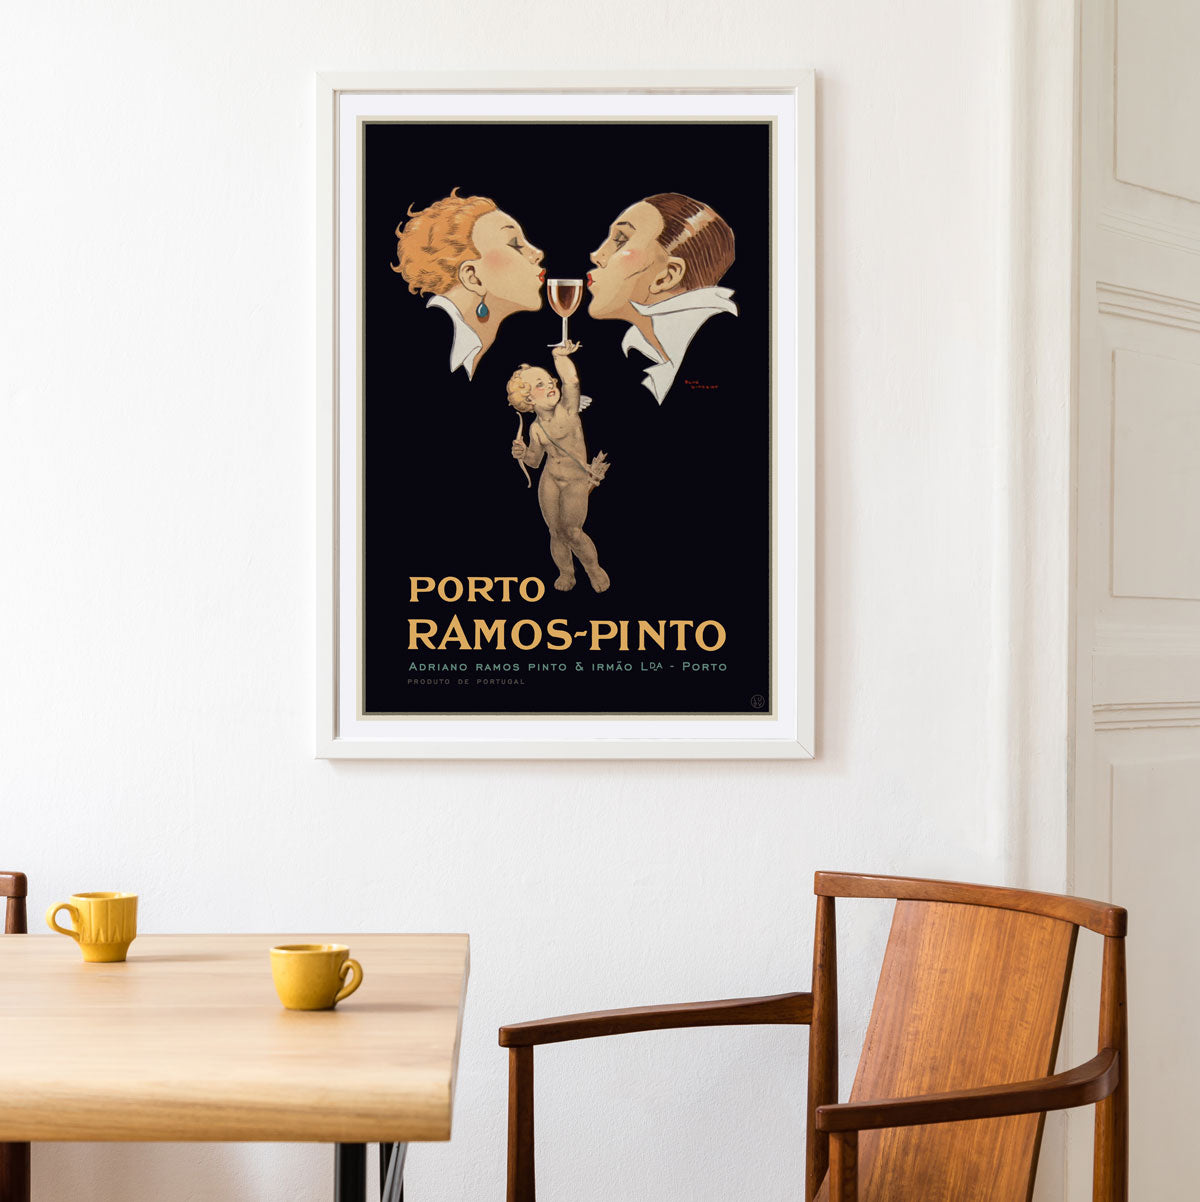 Porto Ramos Pinto France, 1920's advertising poster from Places We Luv